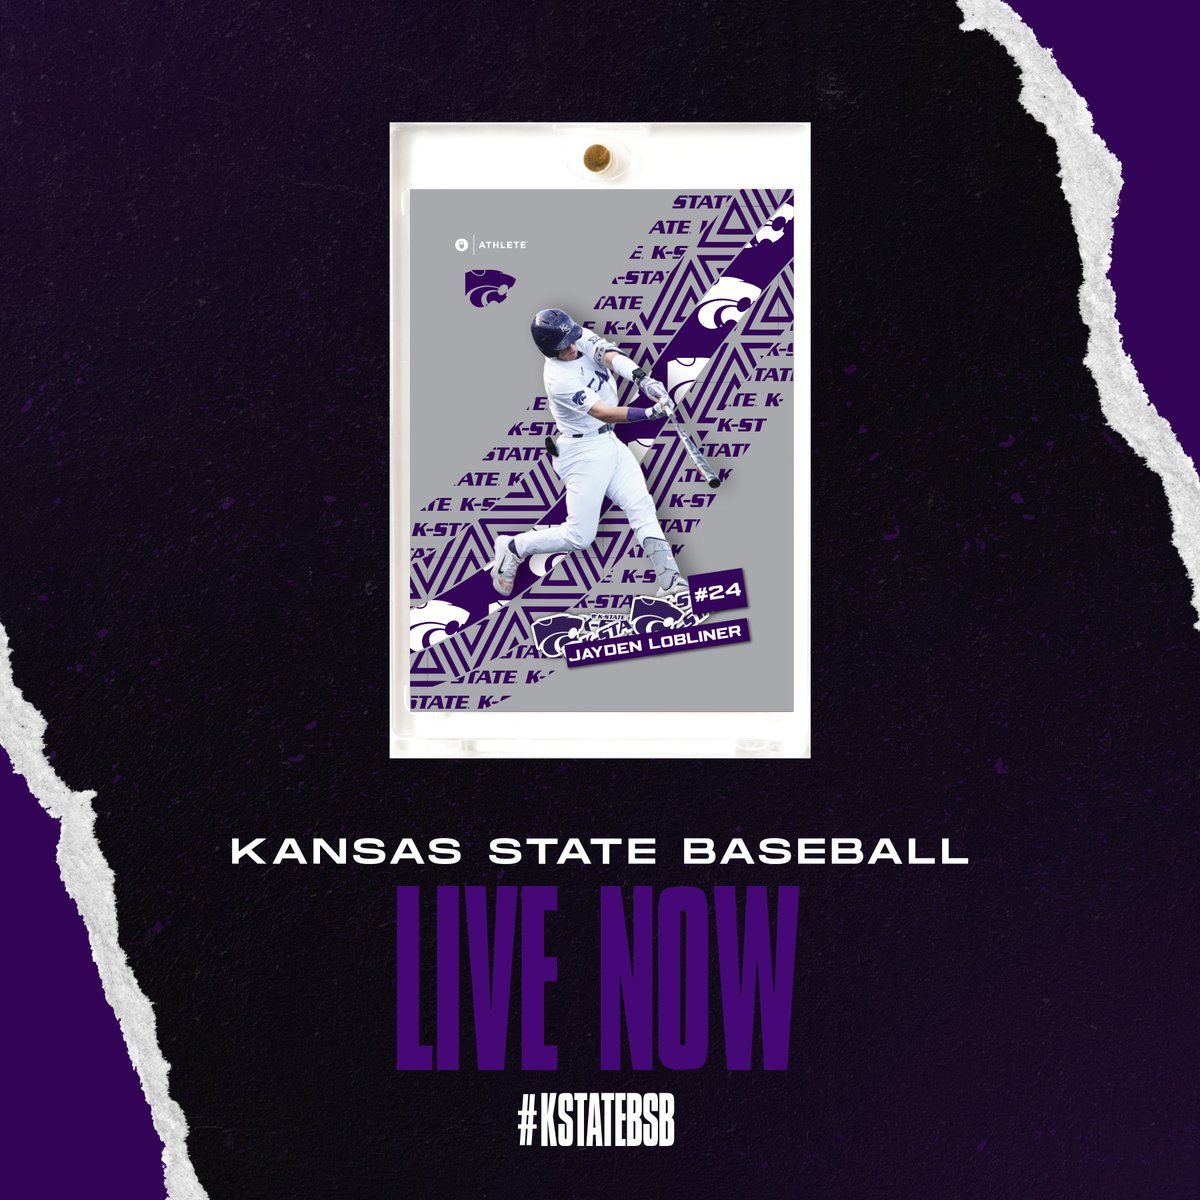 Step up to the plate and score big with Kansas State Baseball cards NOW LIVE on our site! ⚾️

Don’t wait – grab your packs now and experience the thrill of the game like never before!

#kstatebsb #KStateBaseball #TradingCards #CollectTheBest #wildcats #kansasstate #kstate